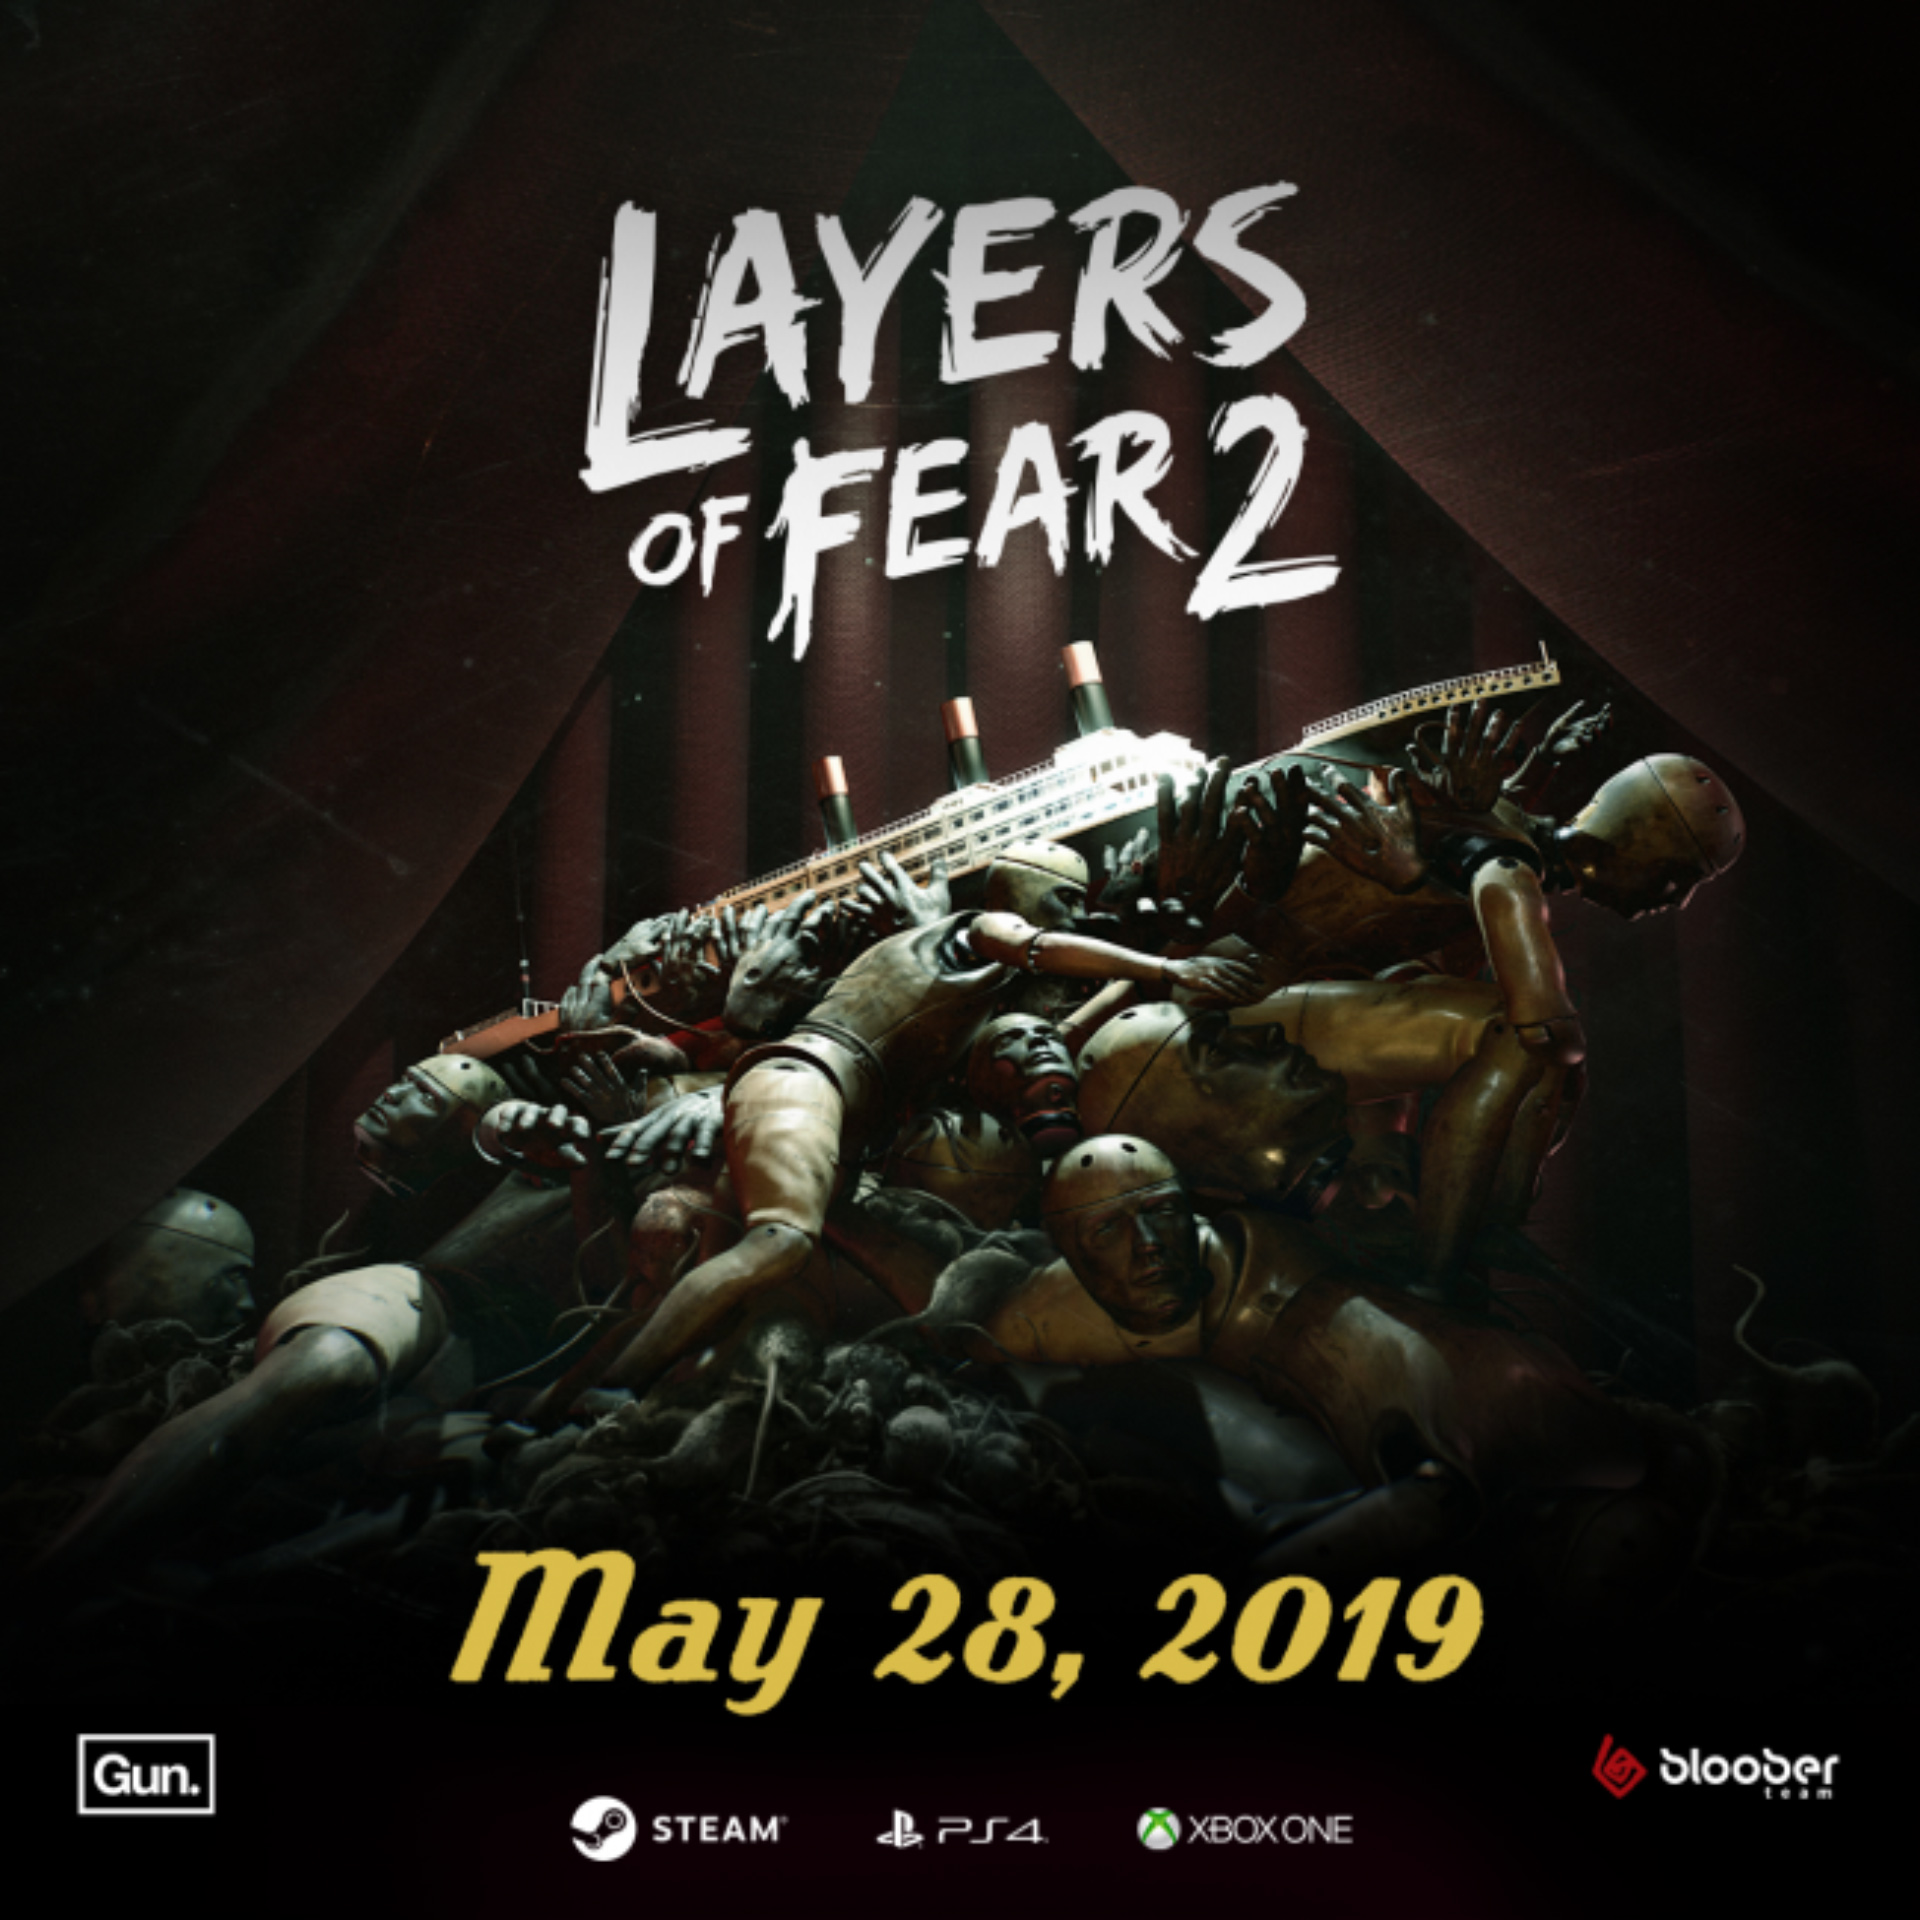 layers-of-fear-2-is-set-to-bring-the-fear-in-may-player-hud